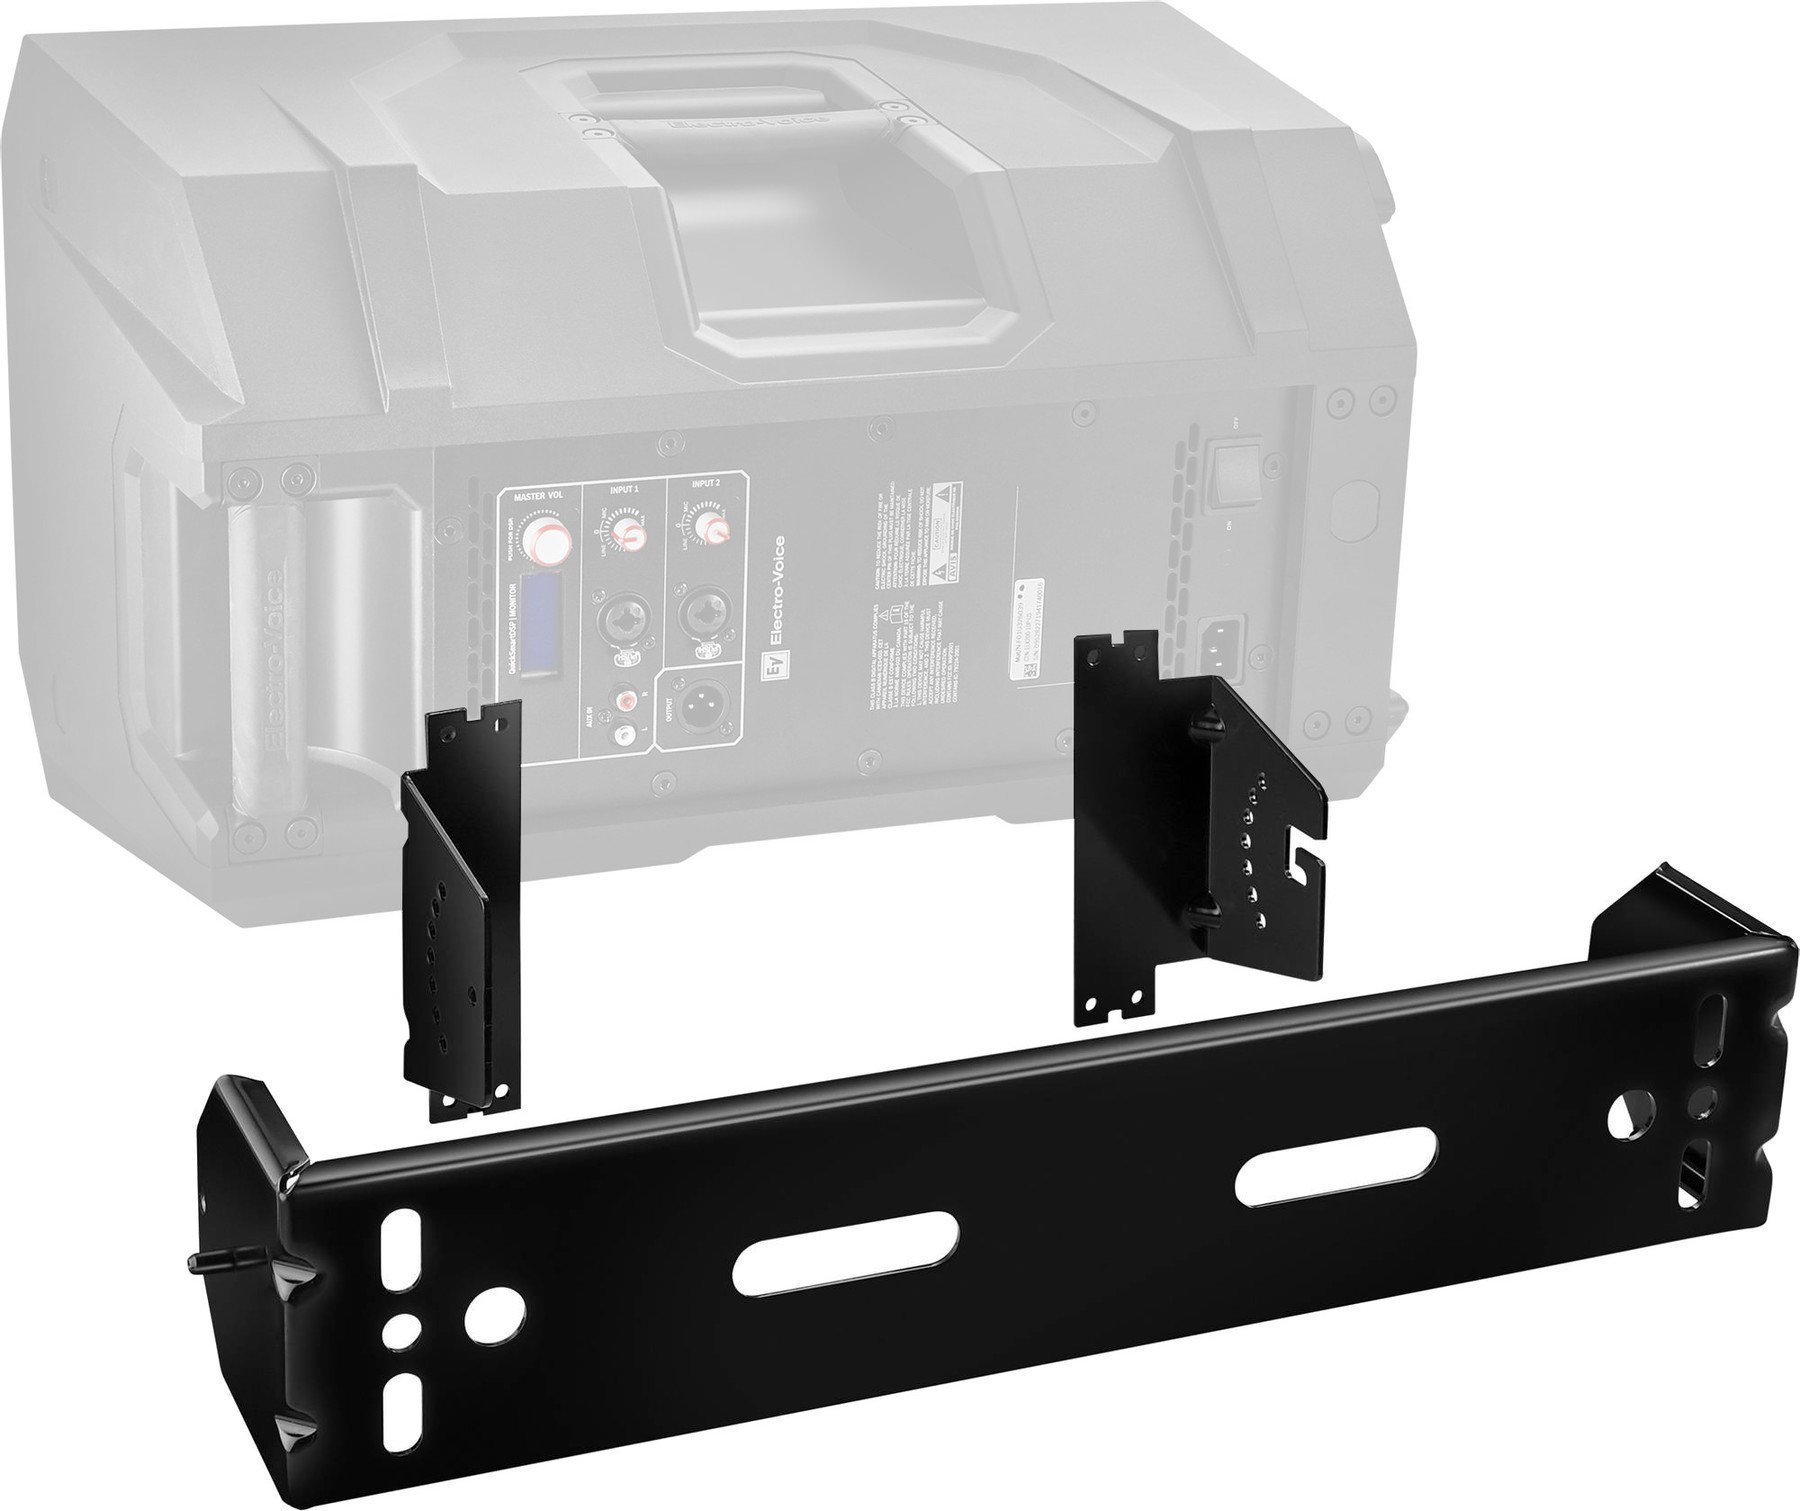 Wall mount for speakerboxes Electro Voice ELX 200-BRKT Wall mount for speakerboxes